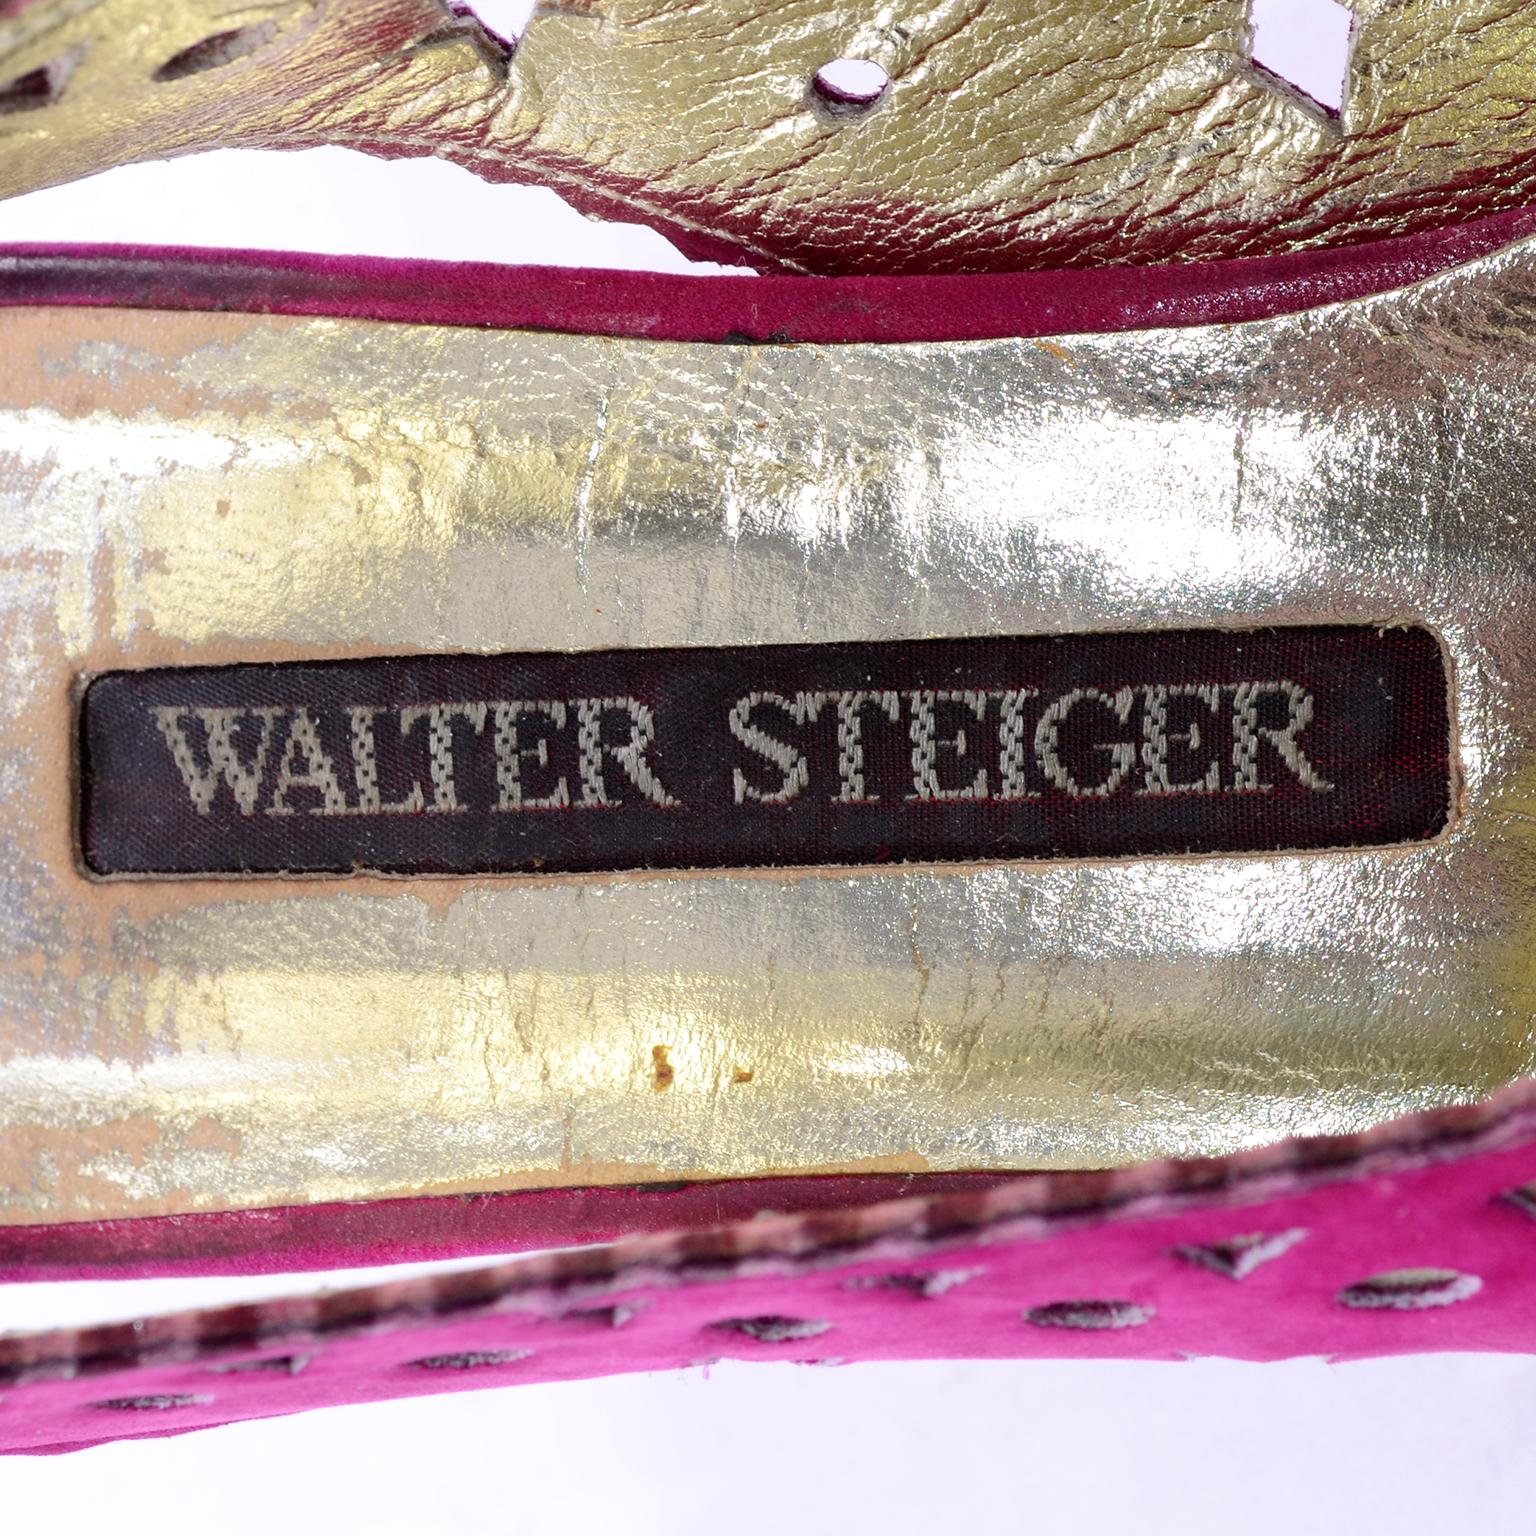 1980s Walter Steiger Slingback Pink Suede Shoes W/ Cut Out Stars & Shapes 7AA For Sale 2